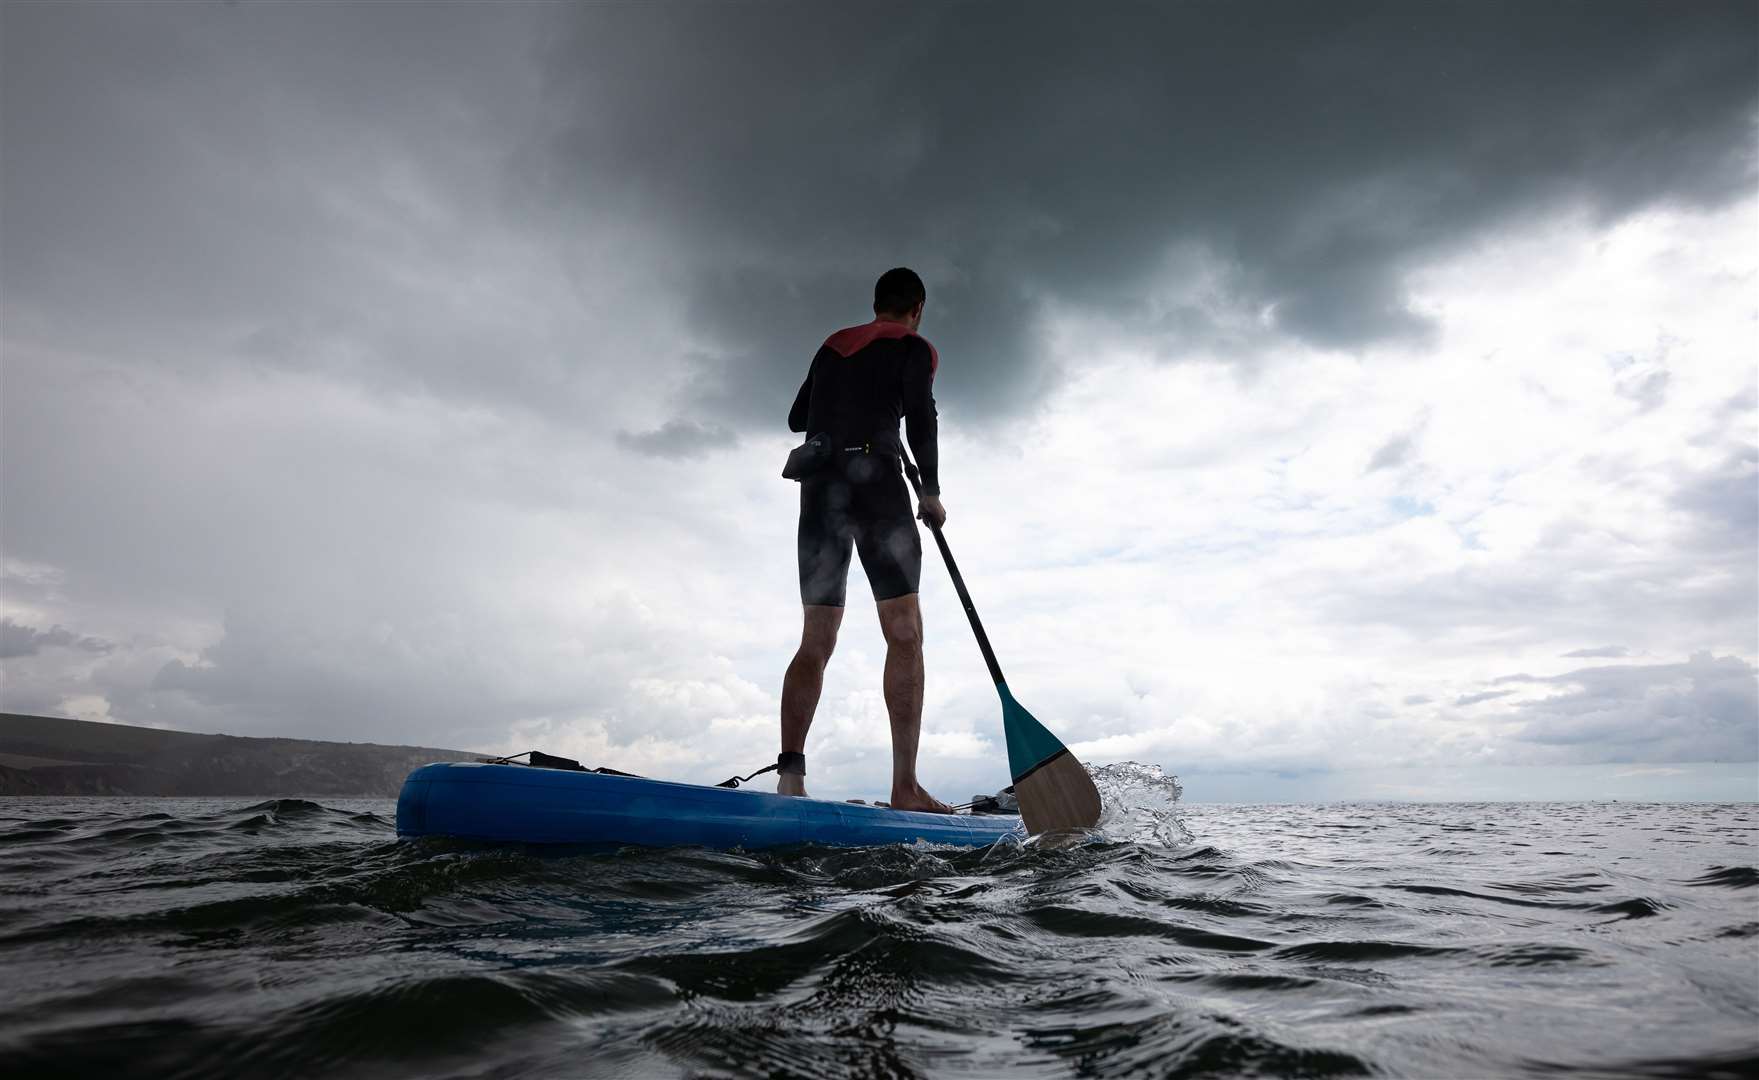 Enjoy stand-up paddleboarding (SUP) in safety by following advice from the RNLI and the Coastguard.